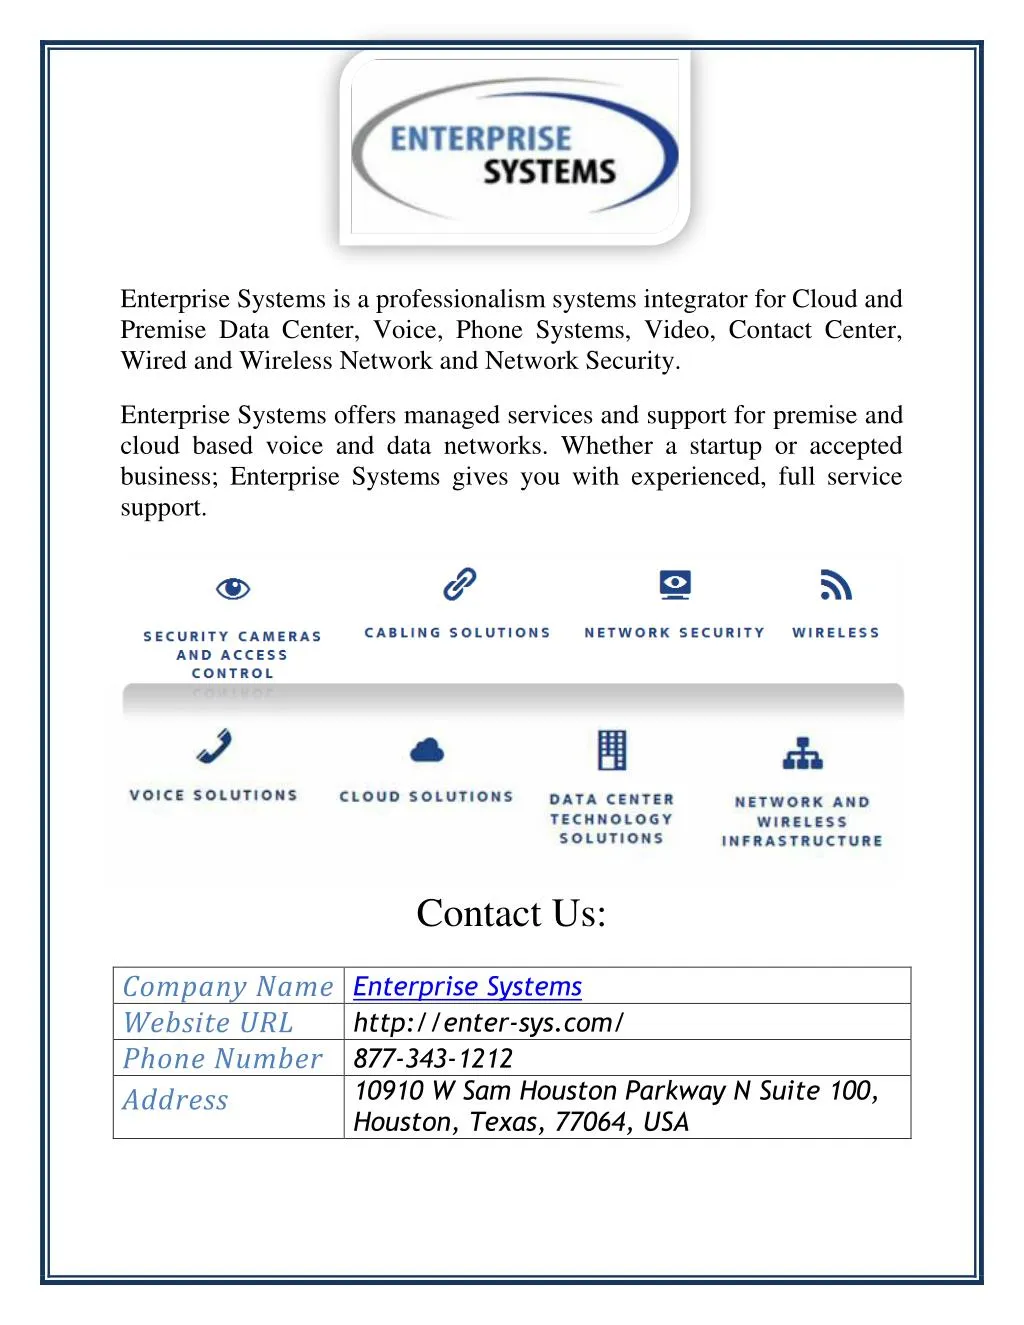 enterprise systems is a professionalism systems